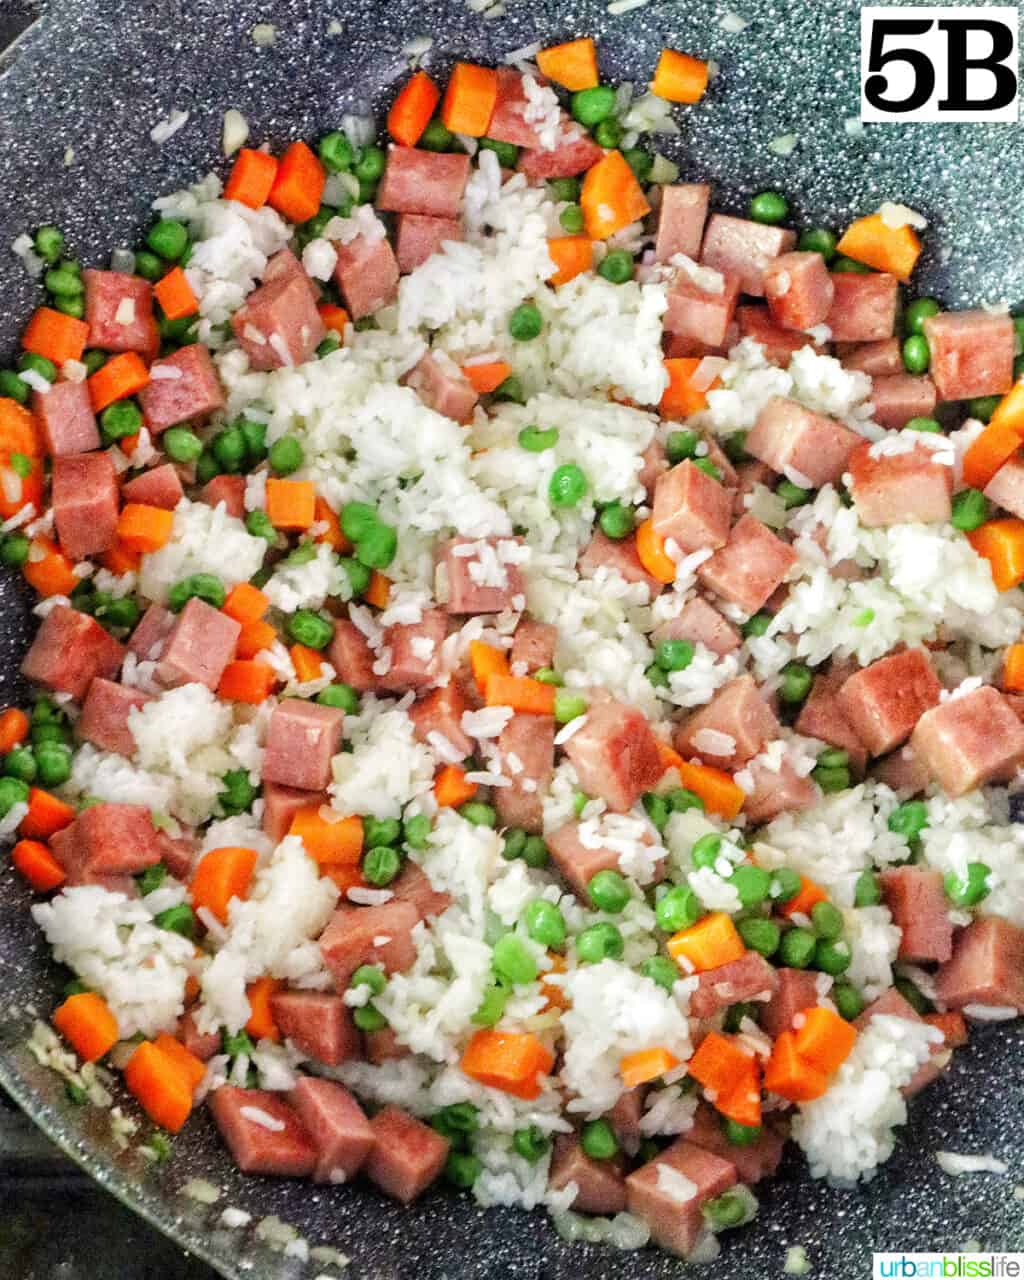 cooking spam fried rice in a wok.